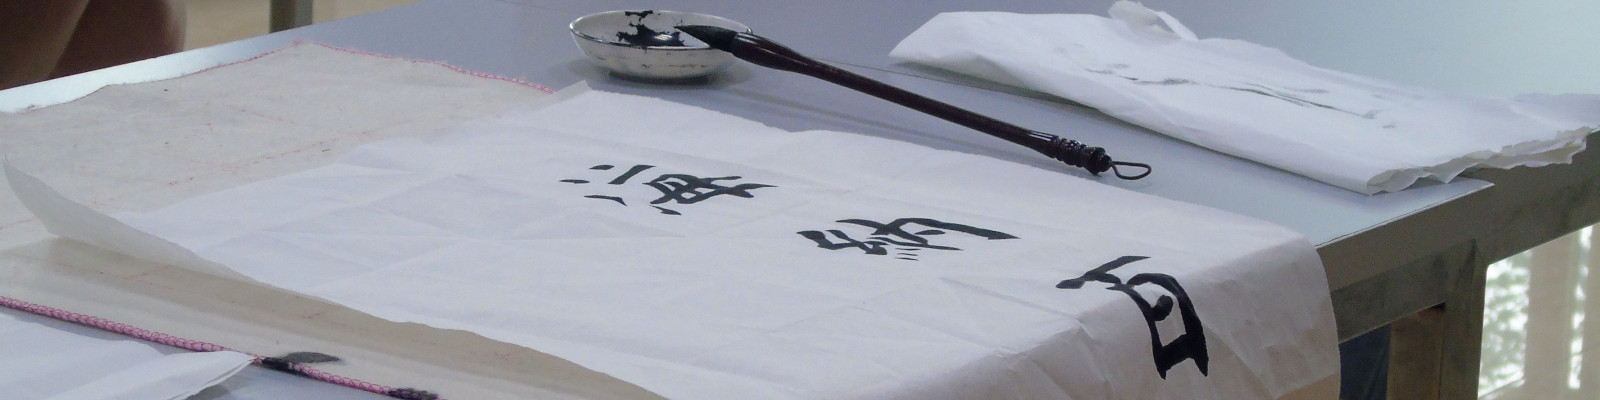 chinese script written on cloth with ink and quill